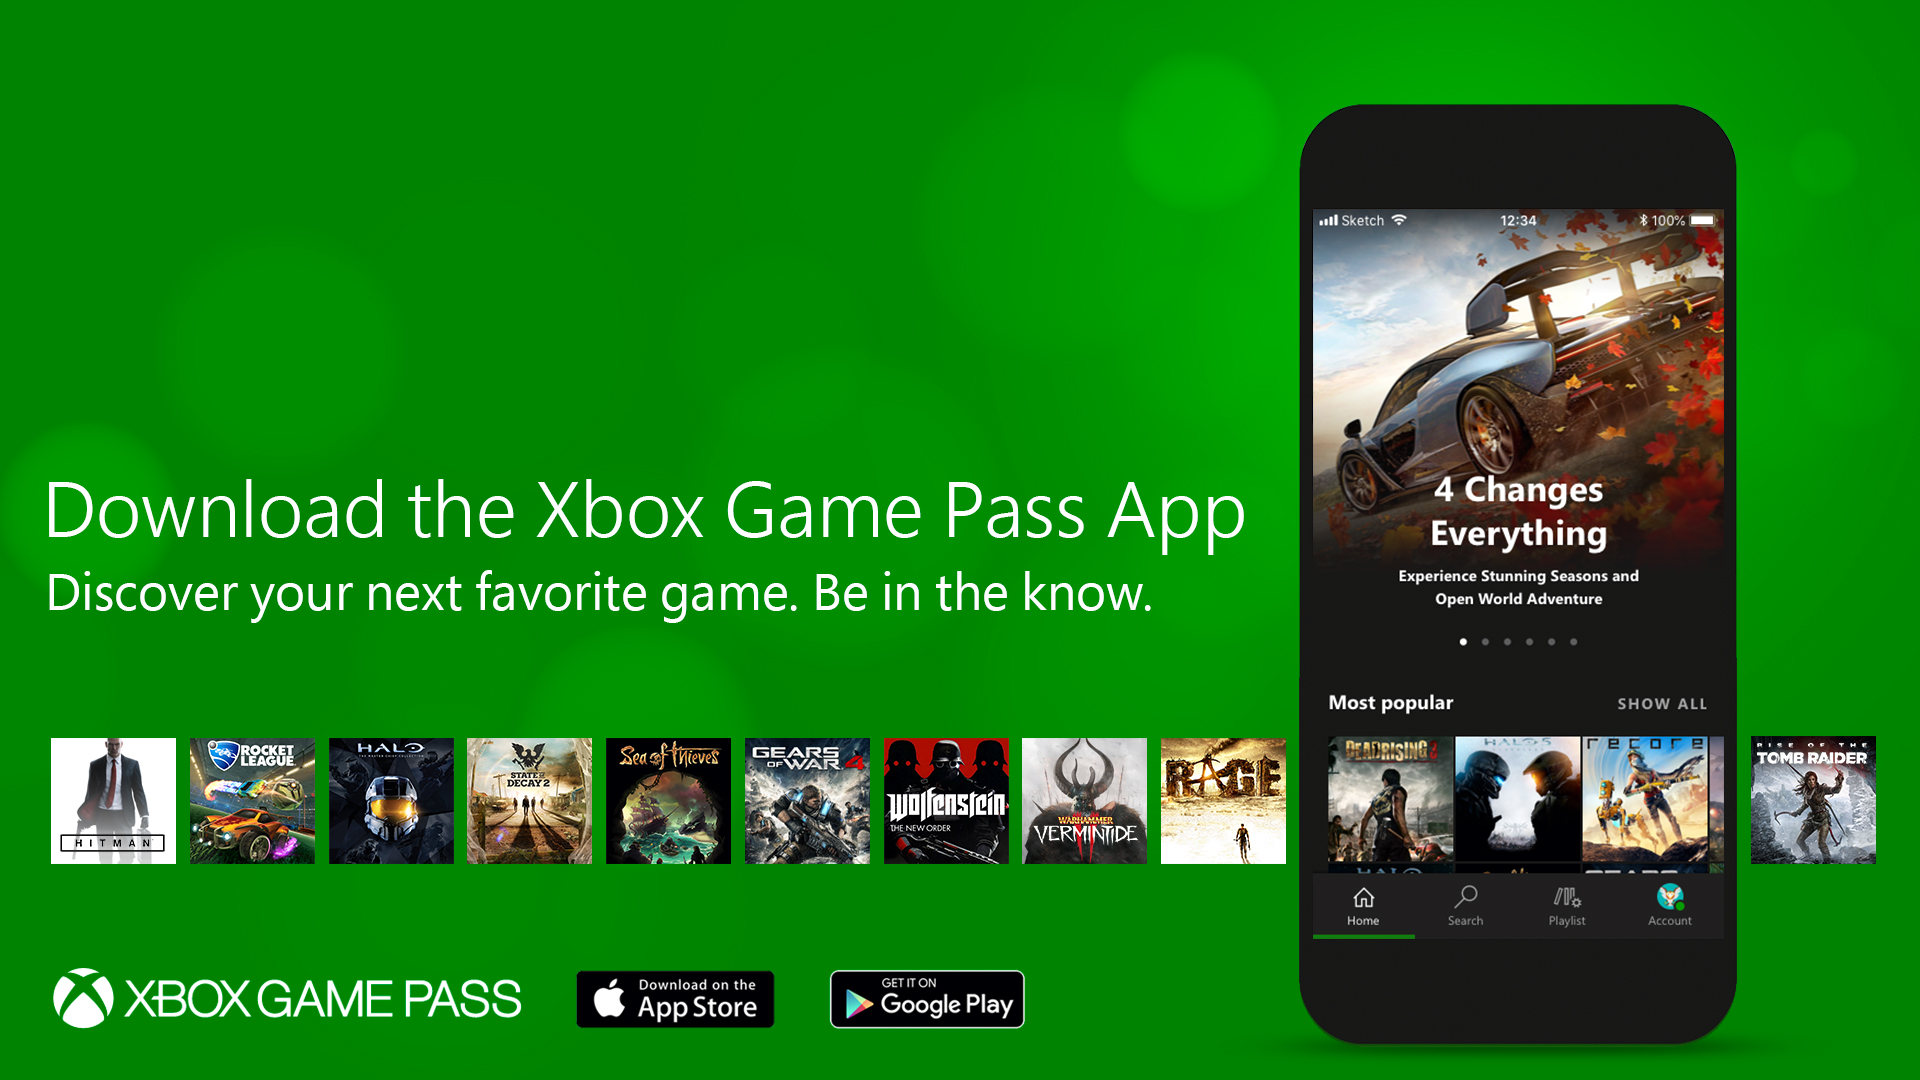 Xbox Game Pass Gets 16 New Games Including PUBG. Get the Mobile App & $1 Deal Today